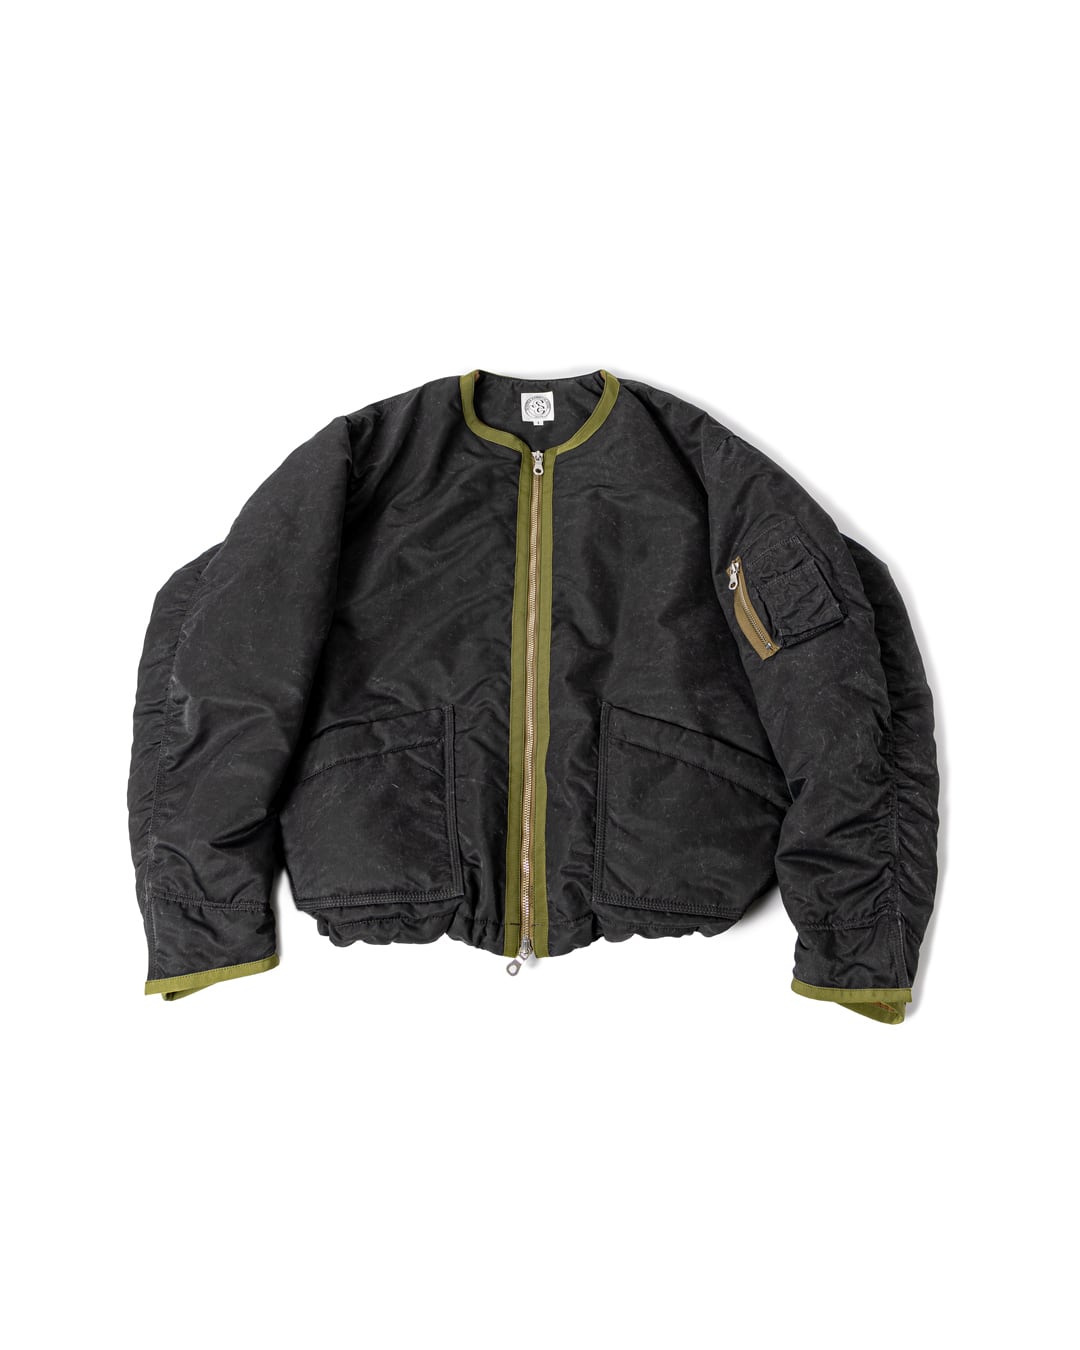 Simply complicated cgn bomber jacket